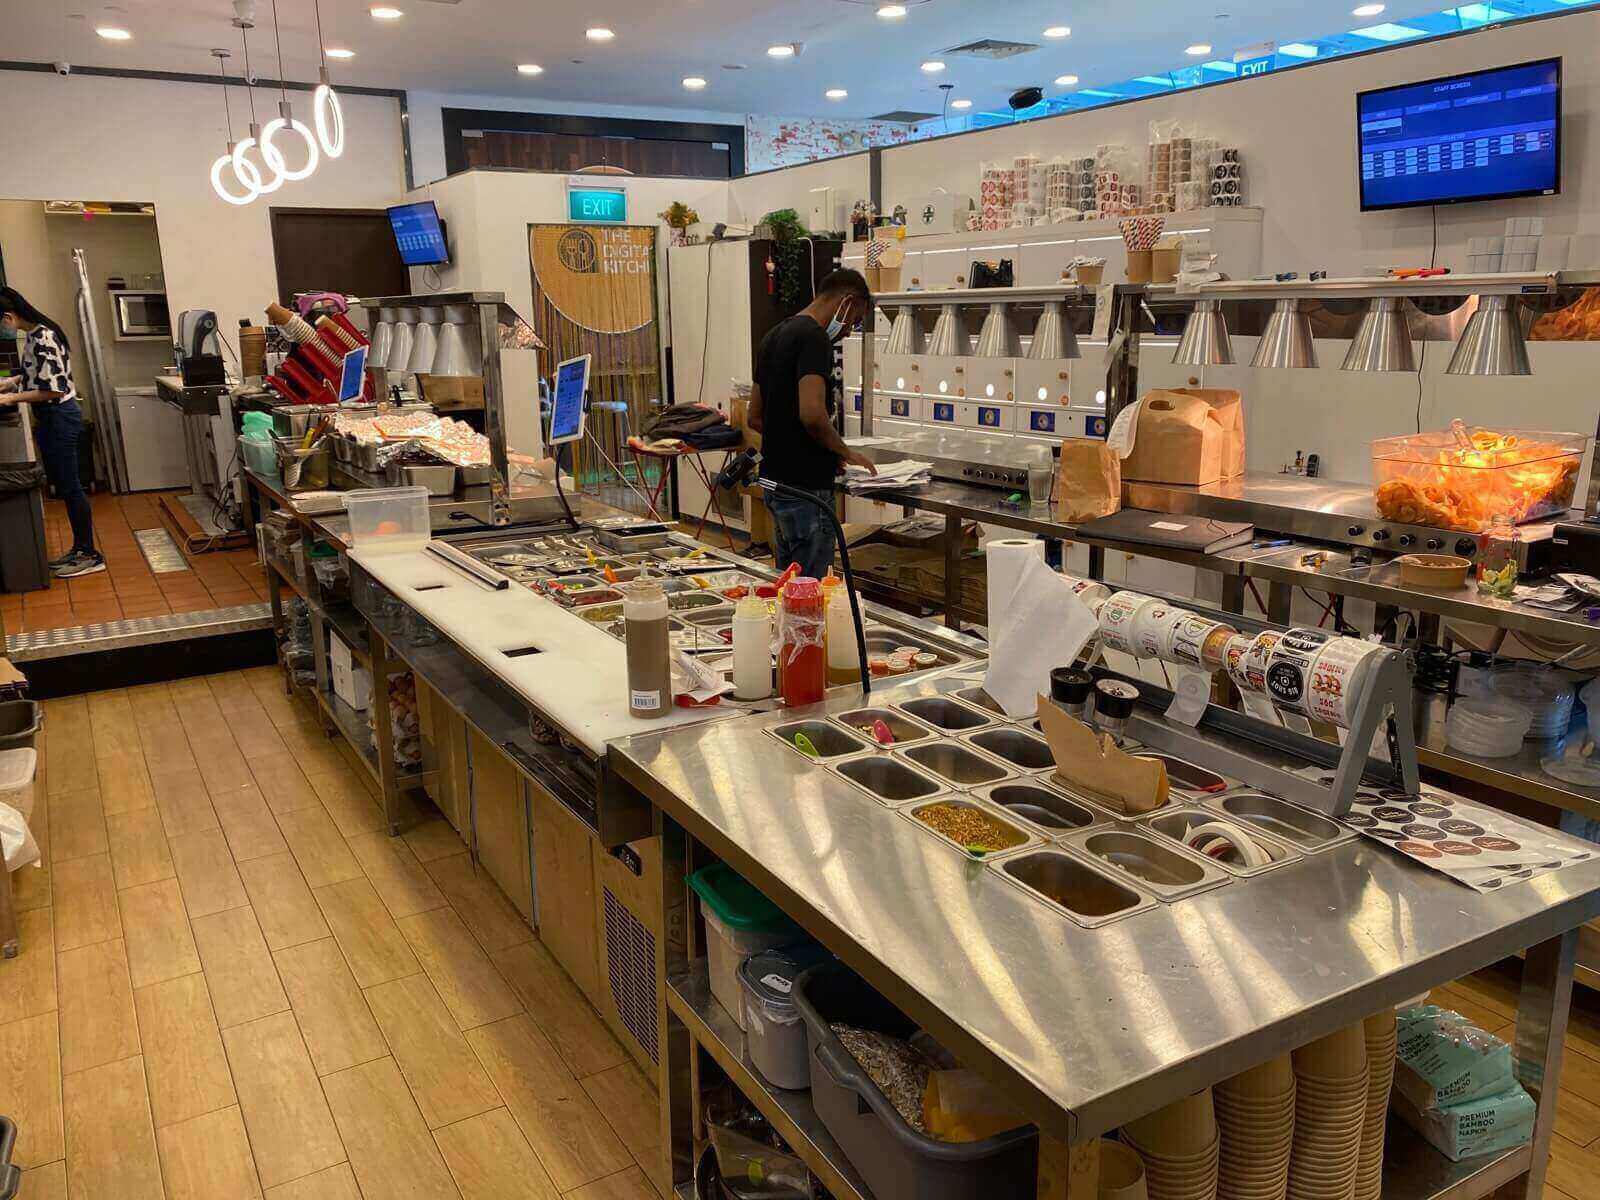 (Expired)Multi-Brand Food Court / Cloud Kitchens (24+ Established Brands, 2 Locations, Huge Potential)